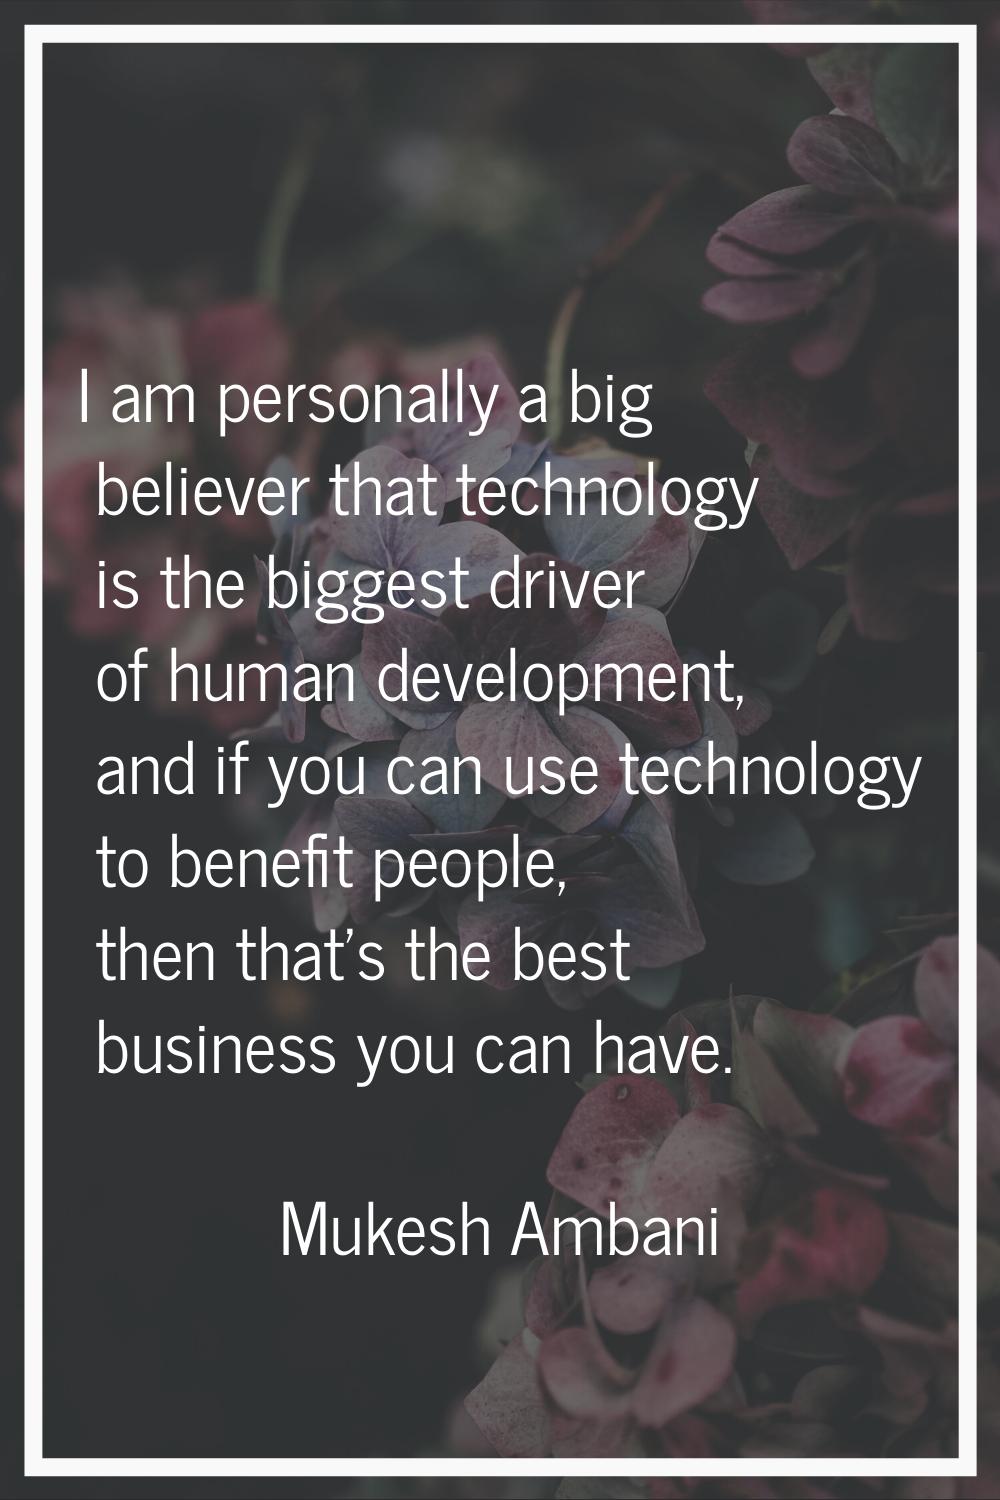 I am personally a big believer that technology is the biggest driver of human development, and if y